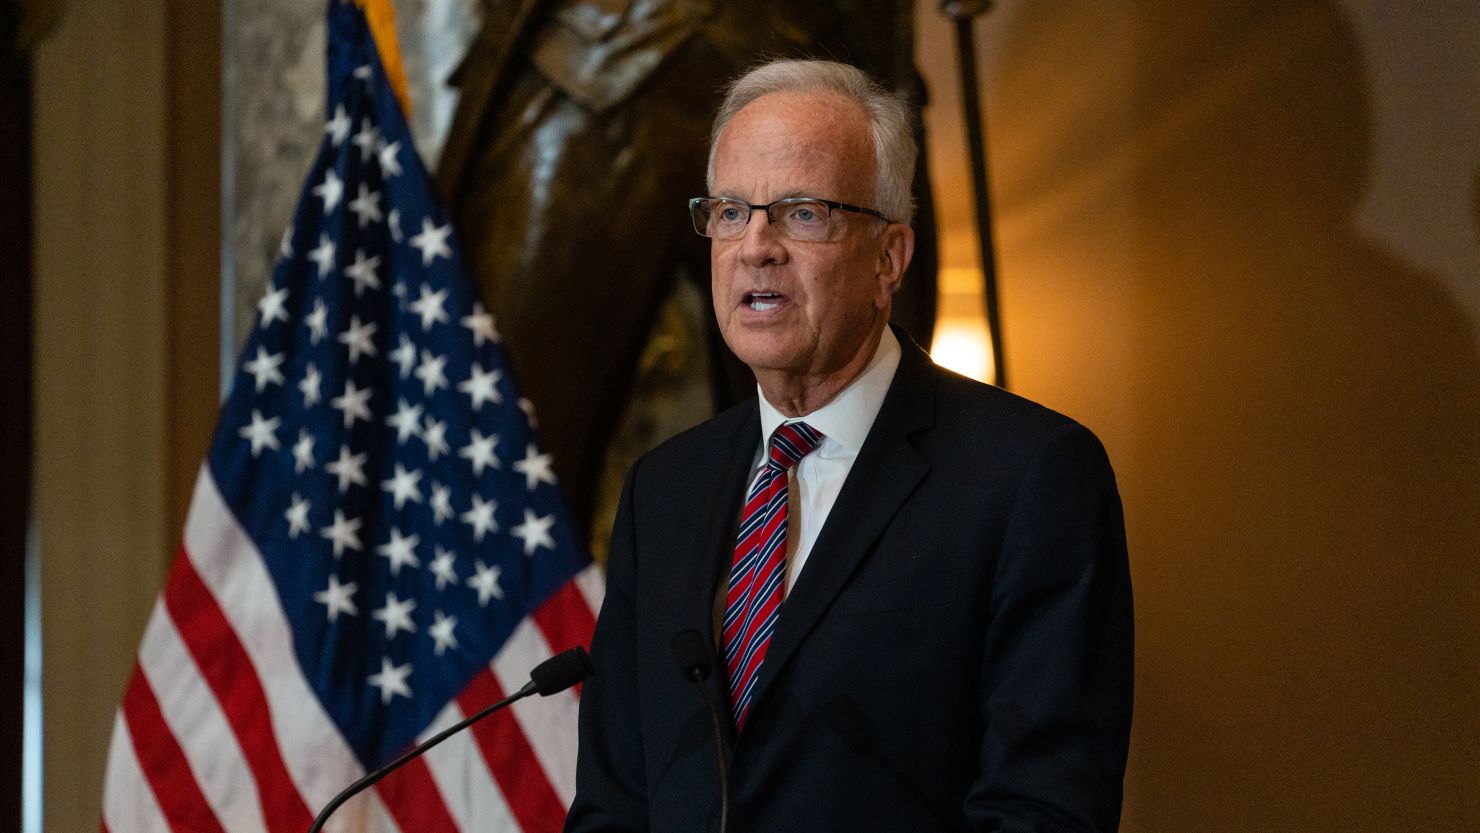 Kansas Sen. Jerry Moran speaks during a ceremony at the US Capitol in Washington, DC, on July 27, 2022. 